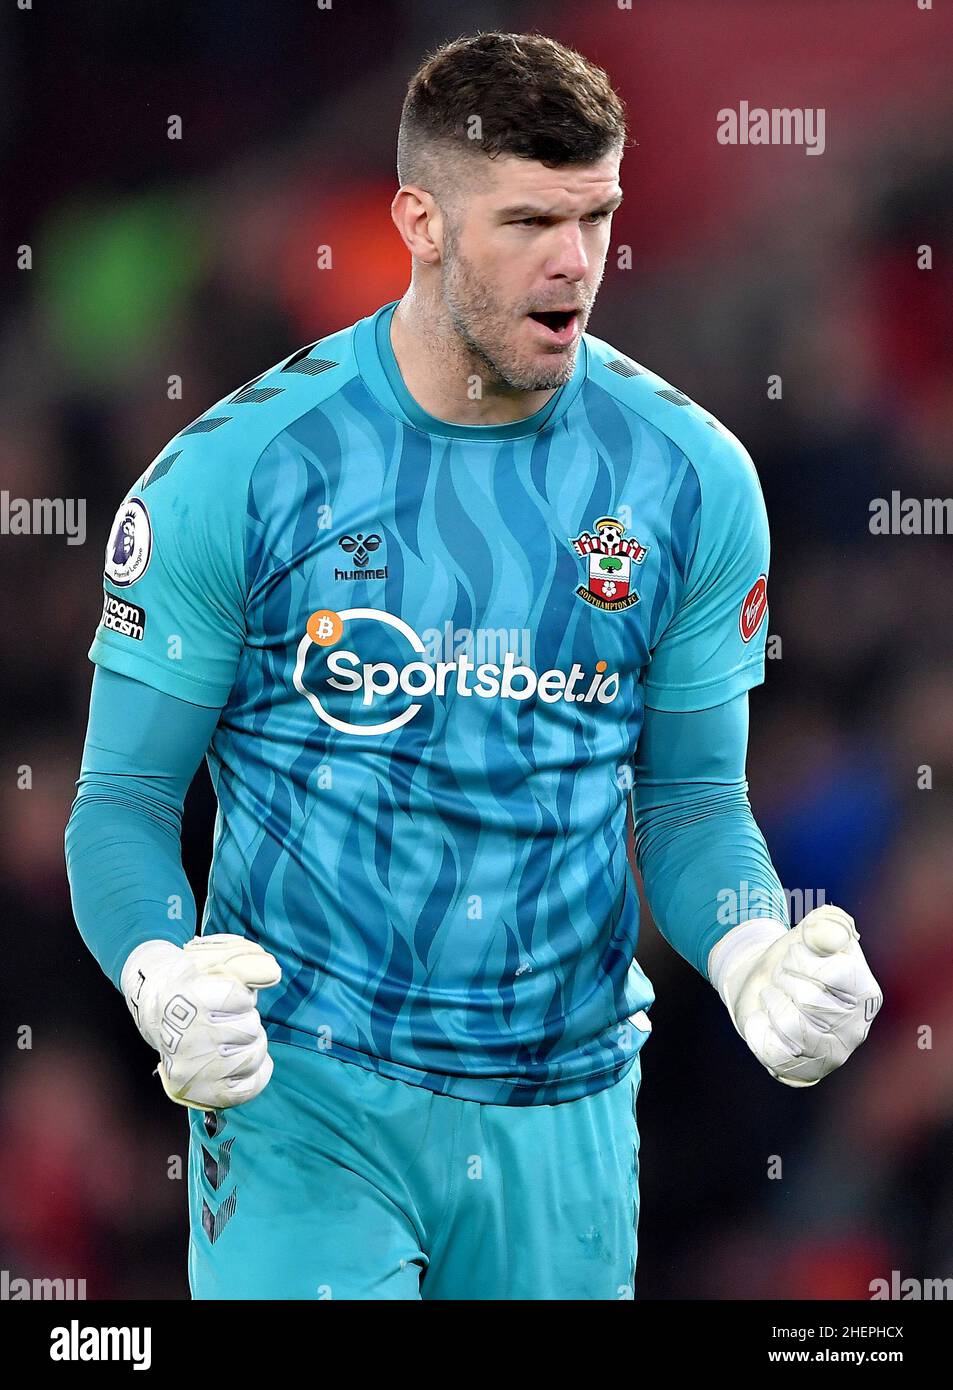 Fraser Forster of Southampton celebrates - Southampton v Brentford, Premier League, St Mary's Stadium, Southampton, UK - 11th January 2022 Editorial Use Only - DataCo restrictions apply Stock Photo